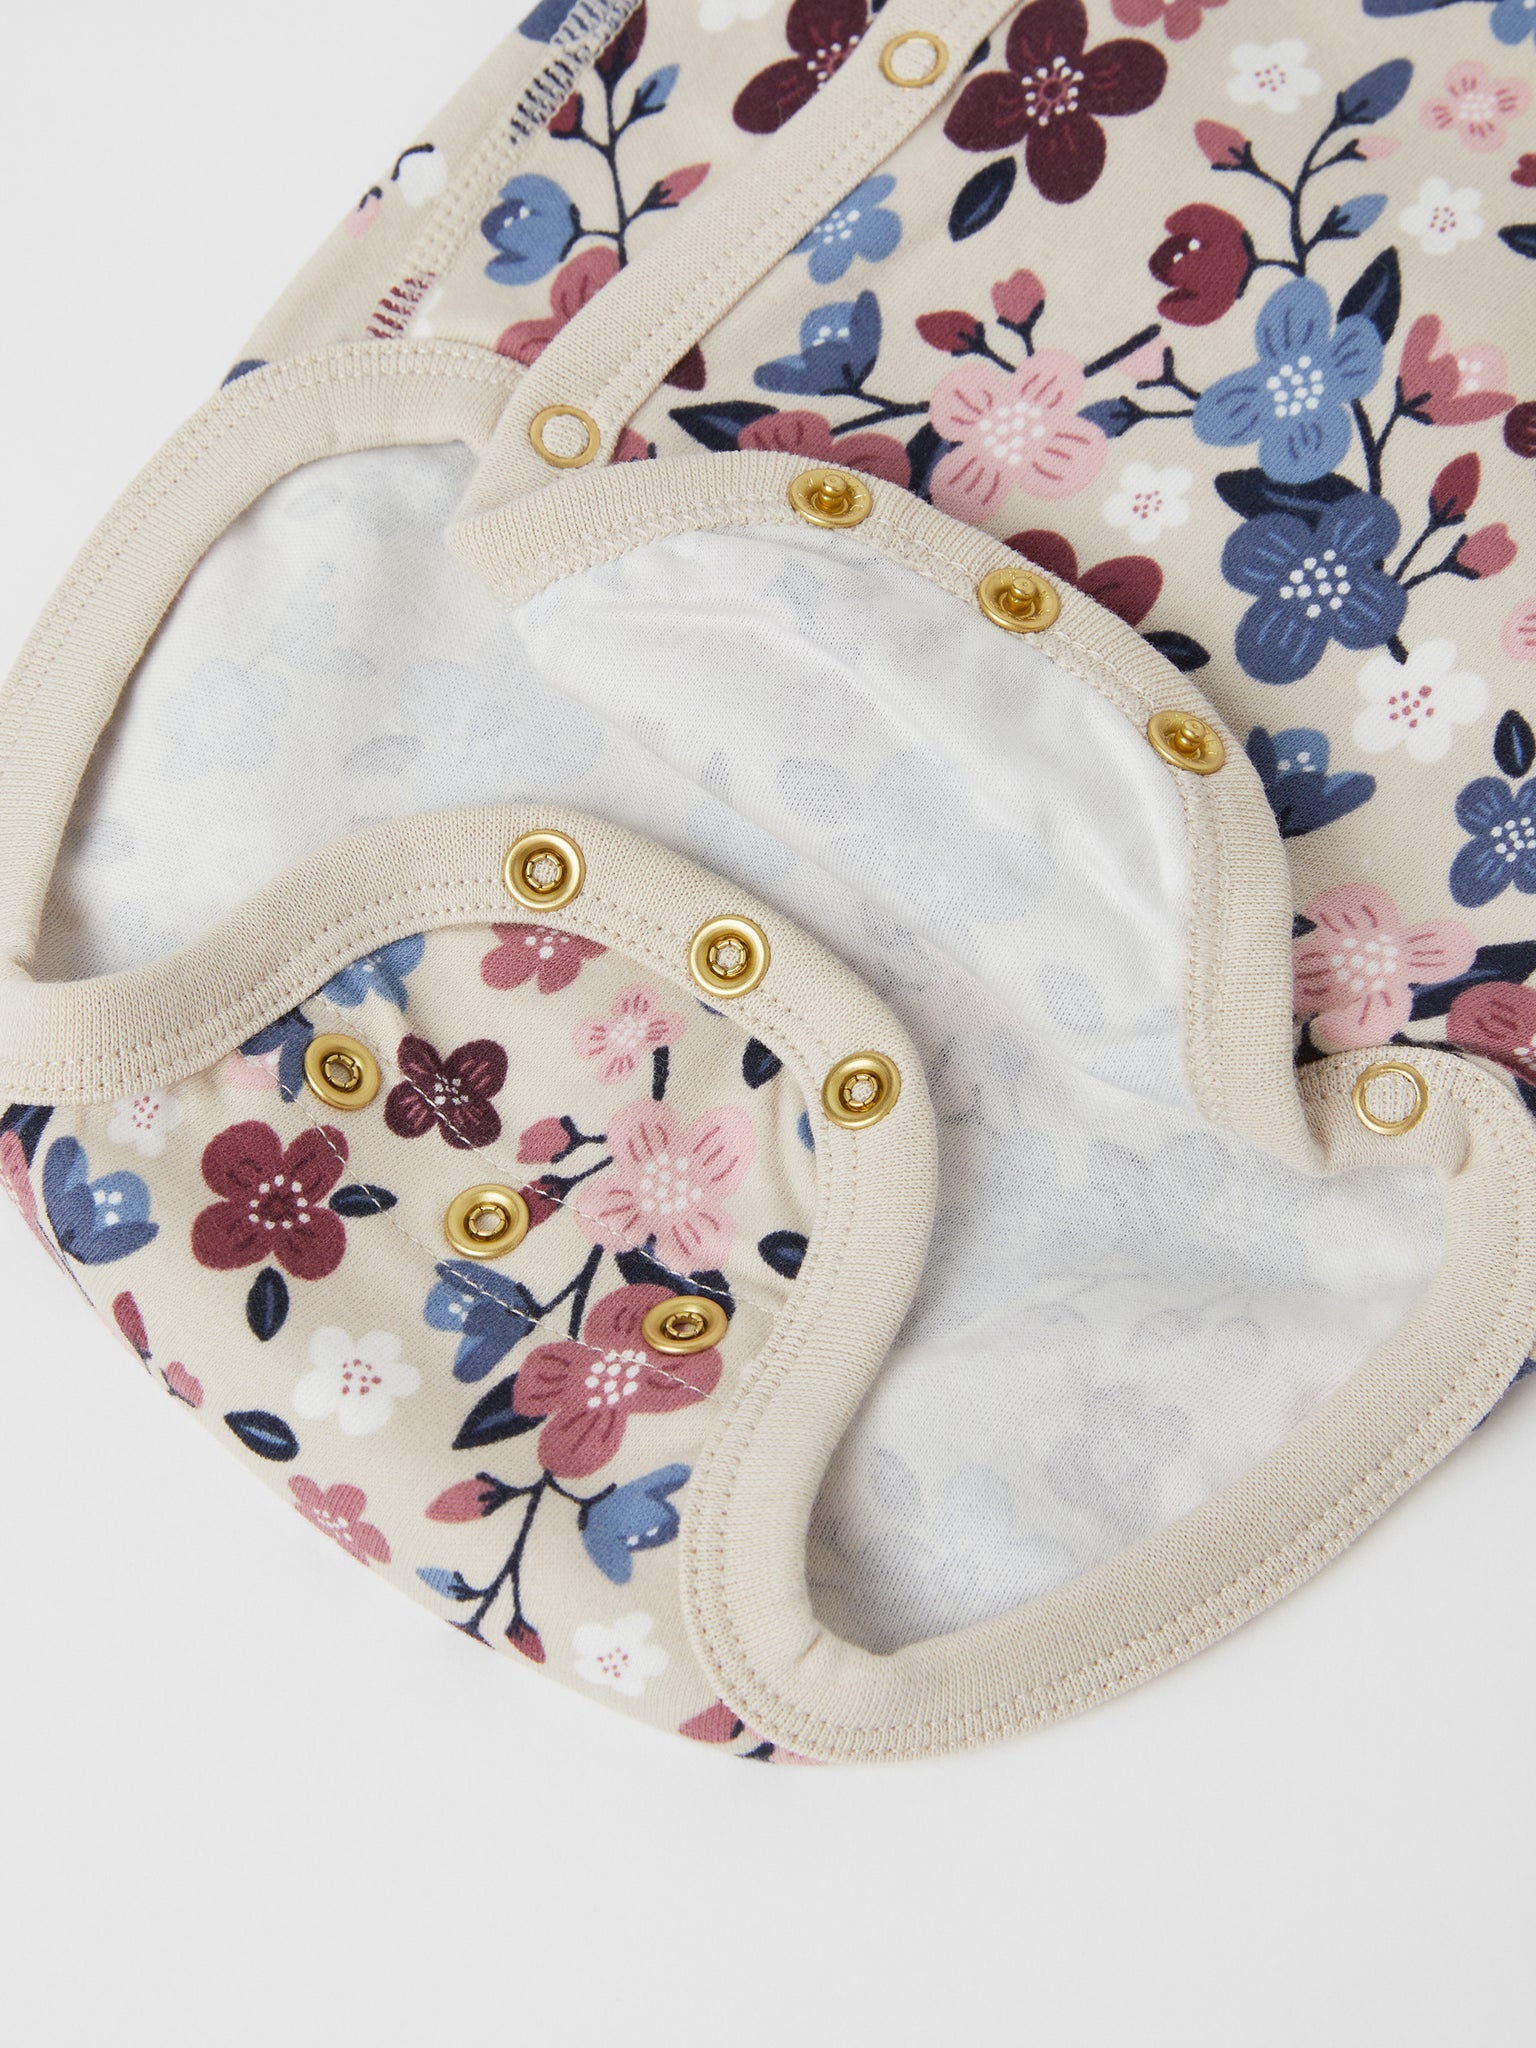 Organic Floral Wrapround Babygrow from the Polarn O. Pyret baby collection. Made using 100% GOTS Organic Cotton